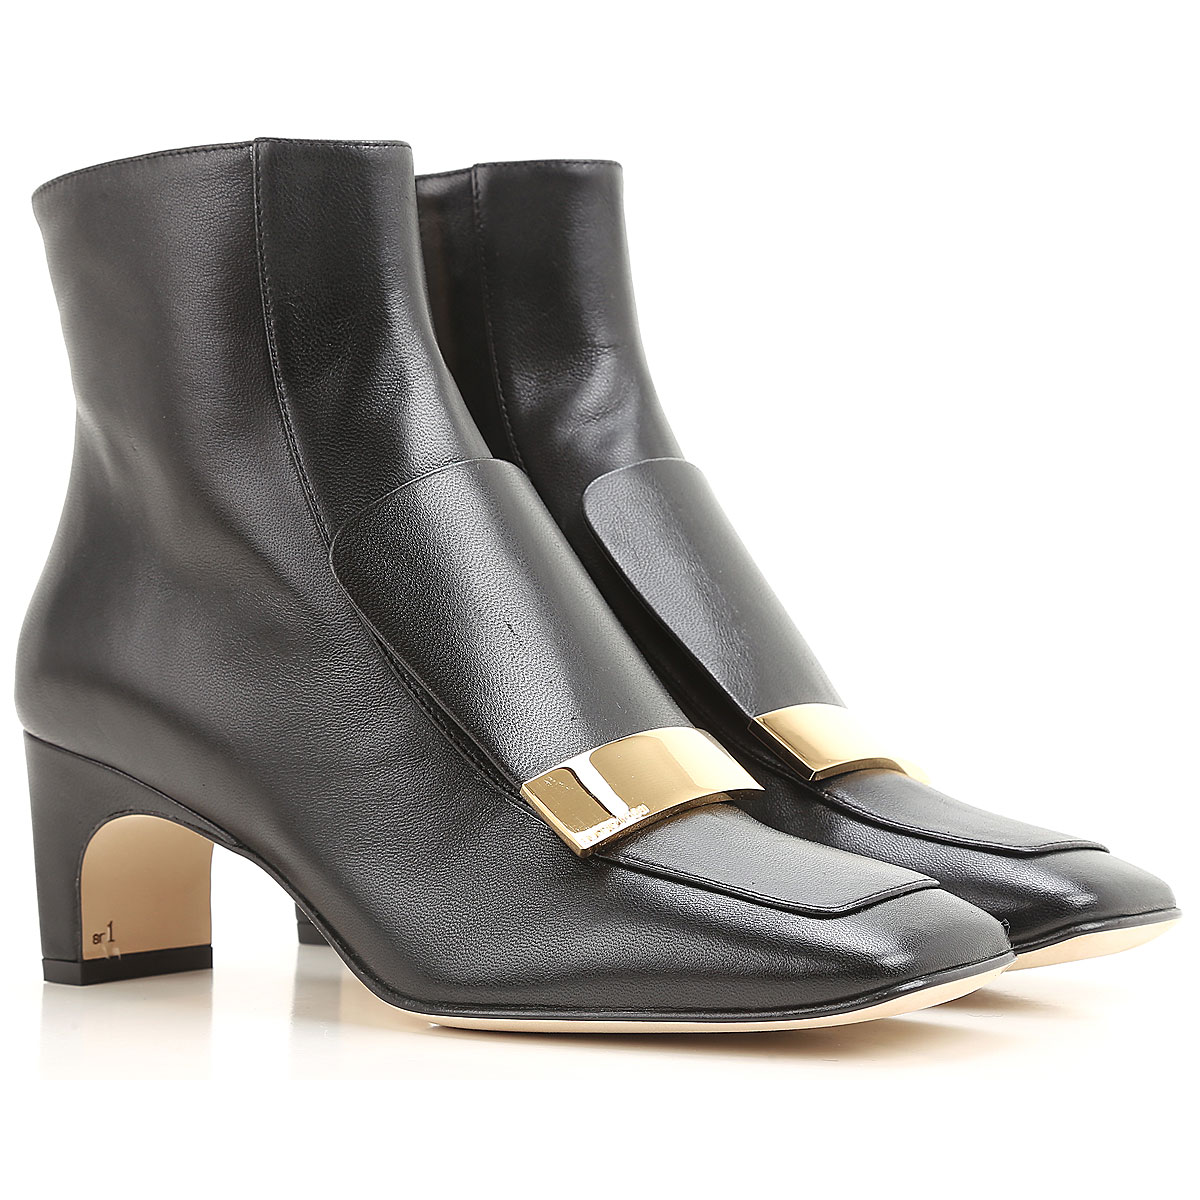 Womens Shoes Sergio Rossi, Style code: a78930-mnan07-1000